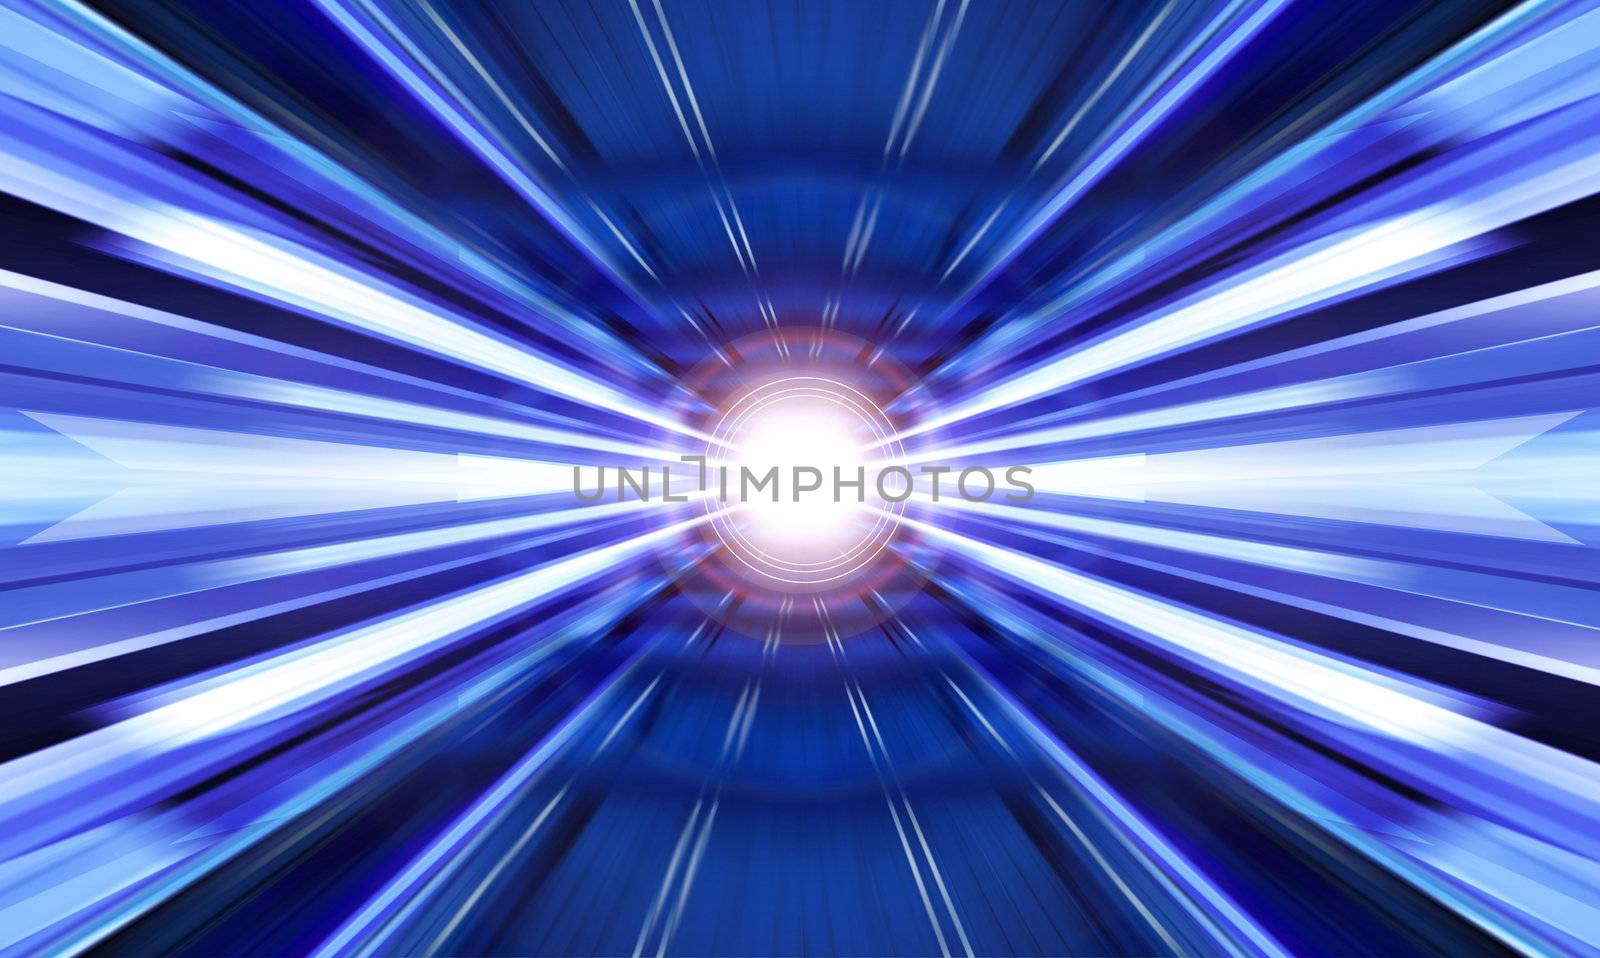 greased blue light of abstract background